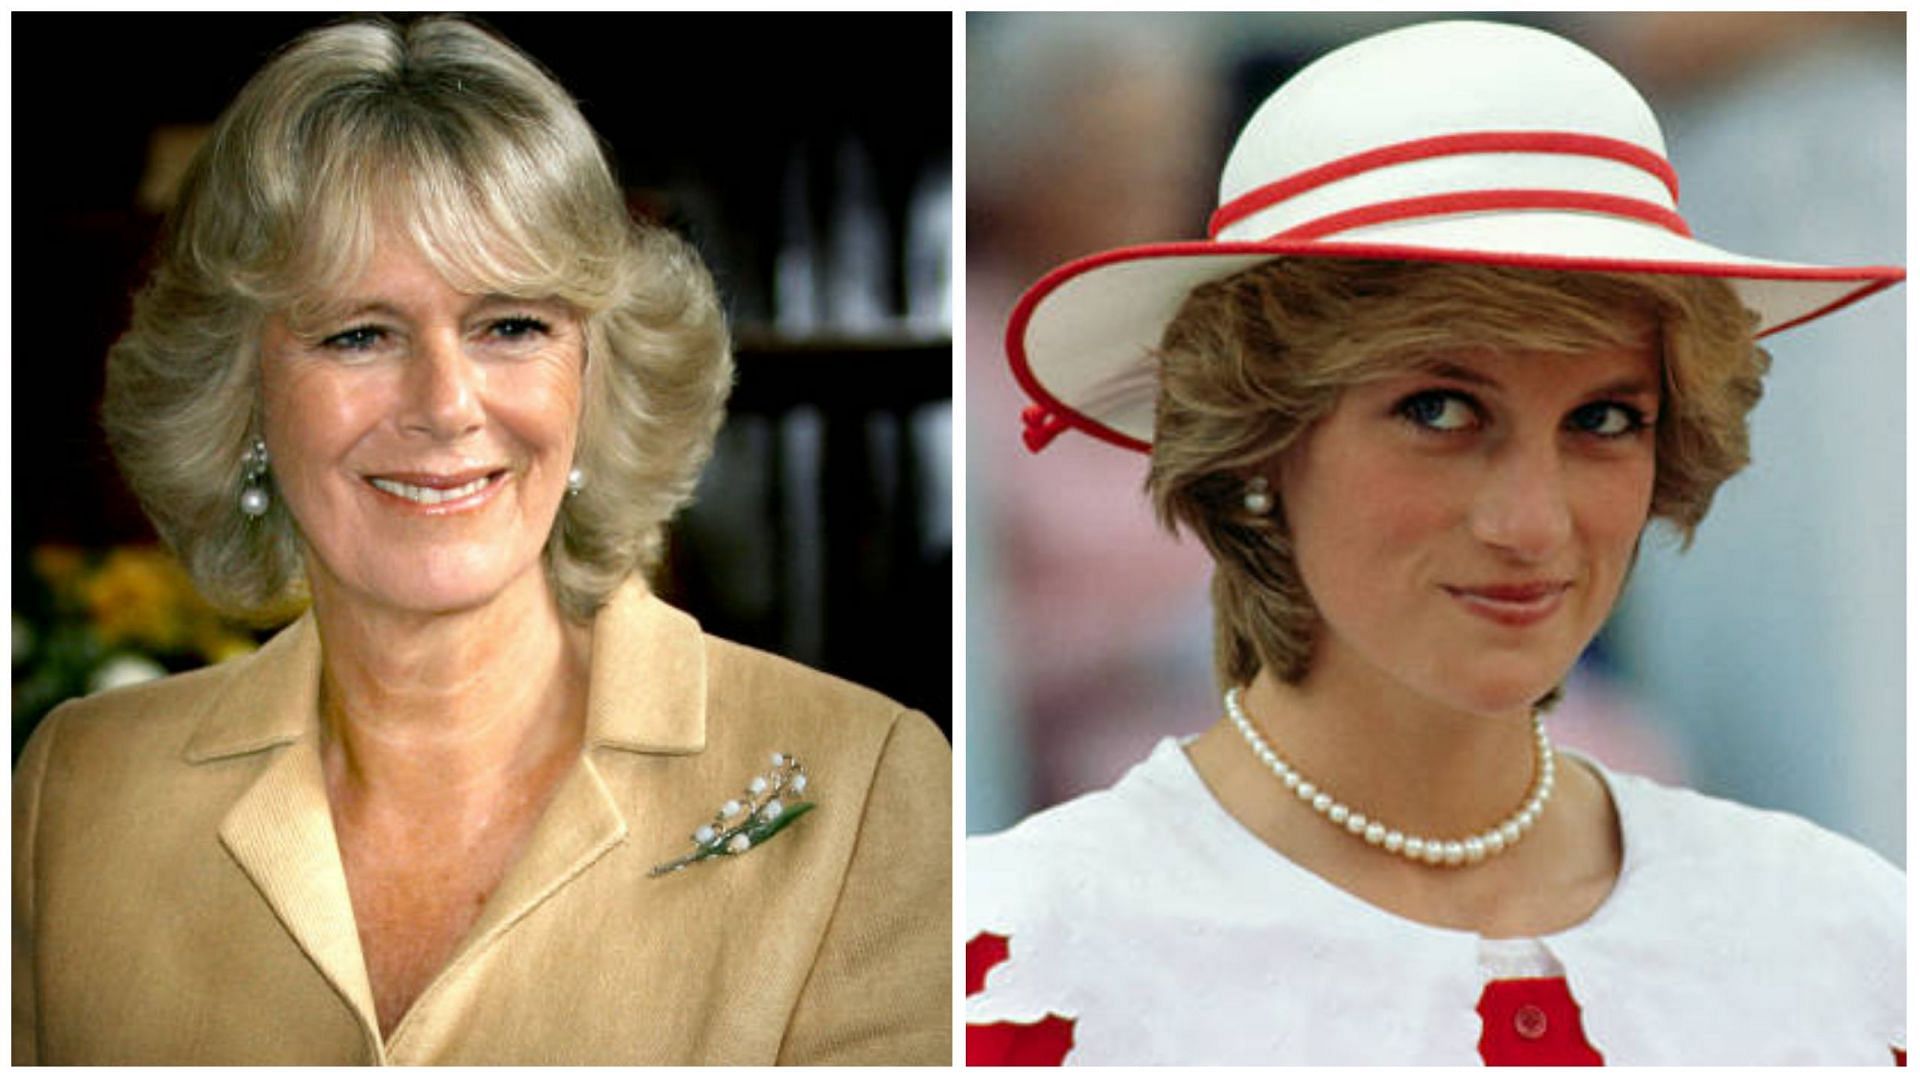 Internet users remember Princess Diana after Queen Elizabeth death (Image via Anthony Devlin and Bettmann/Getty Images)